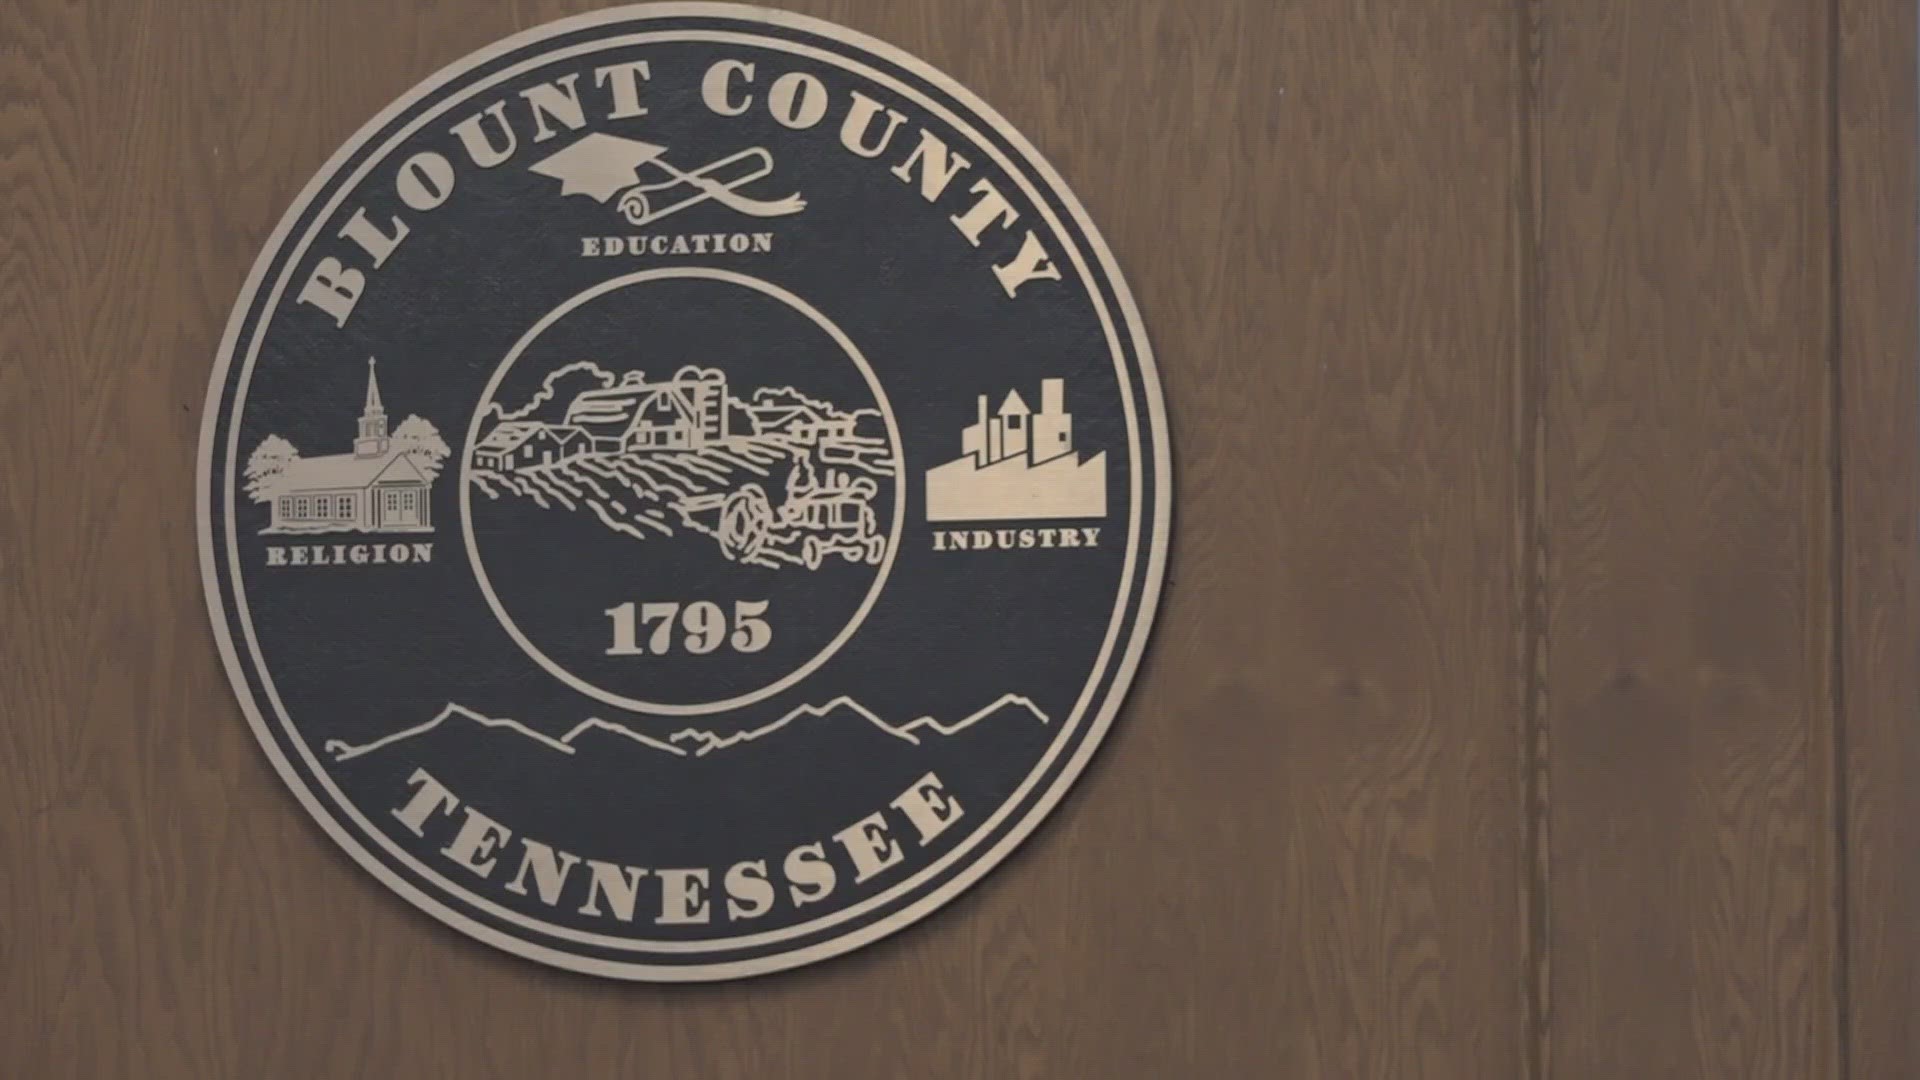 The Blount County Commission still needs to vote on the property tax rate on June 15.